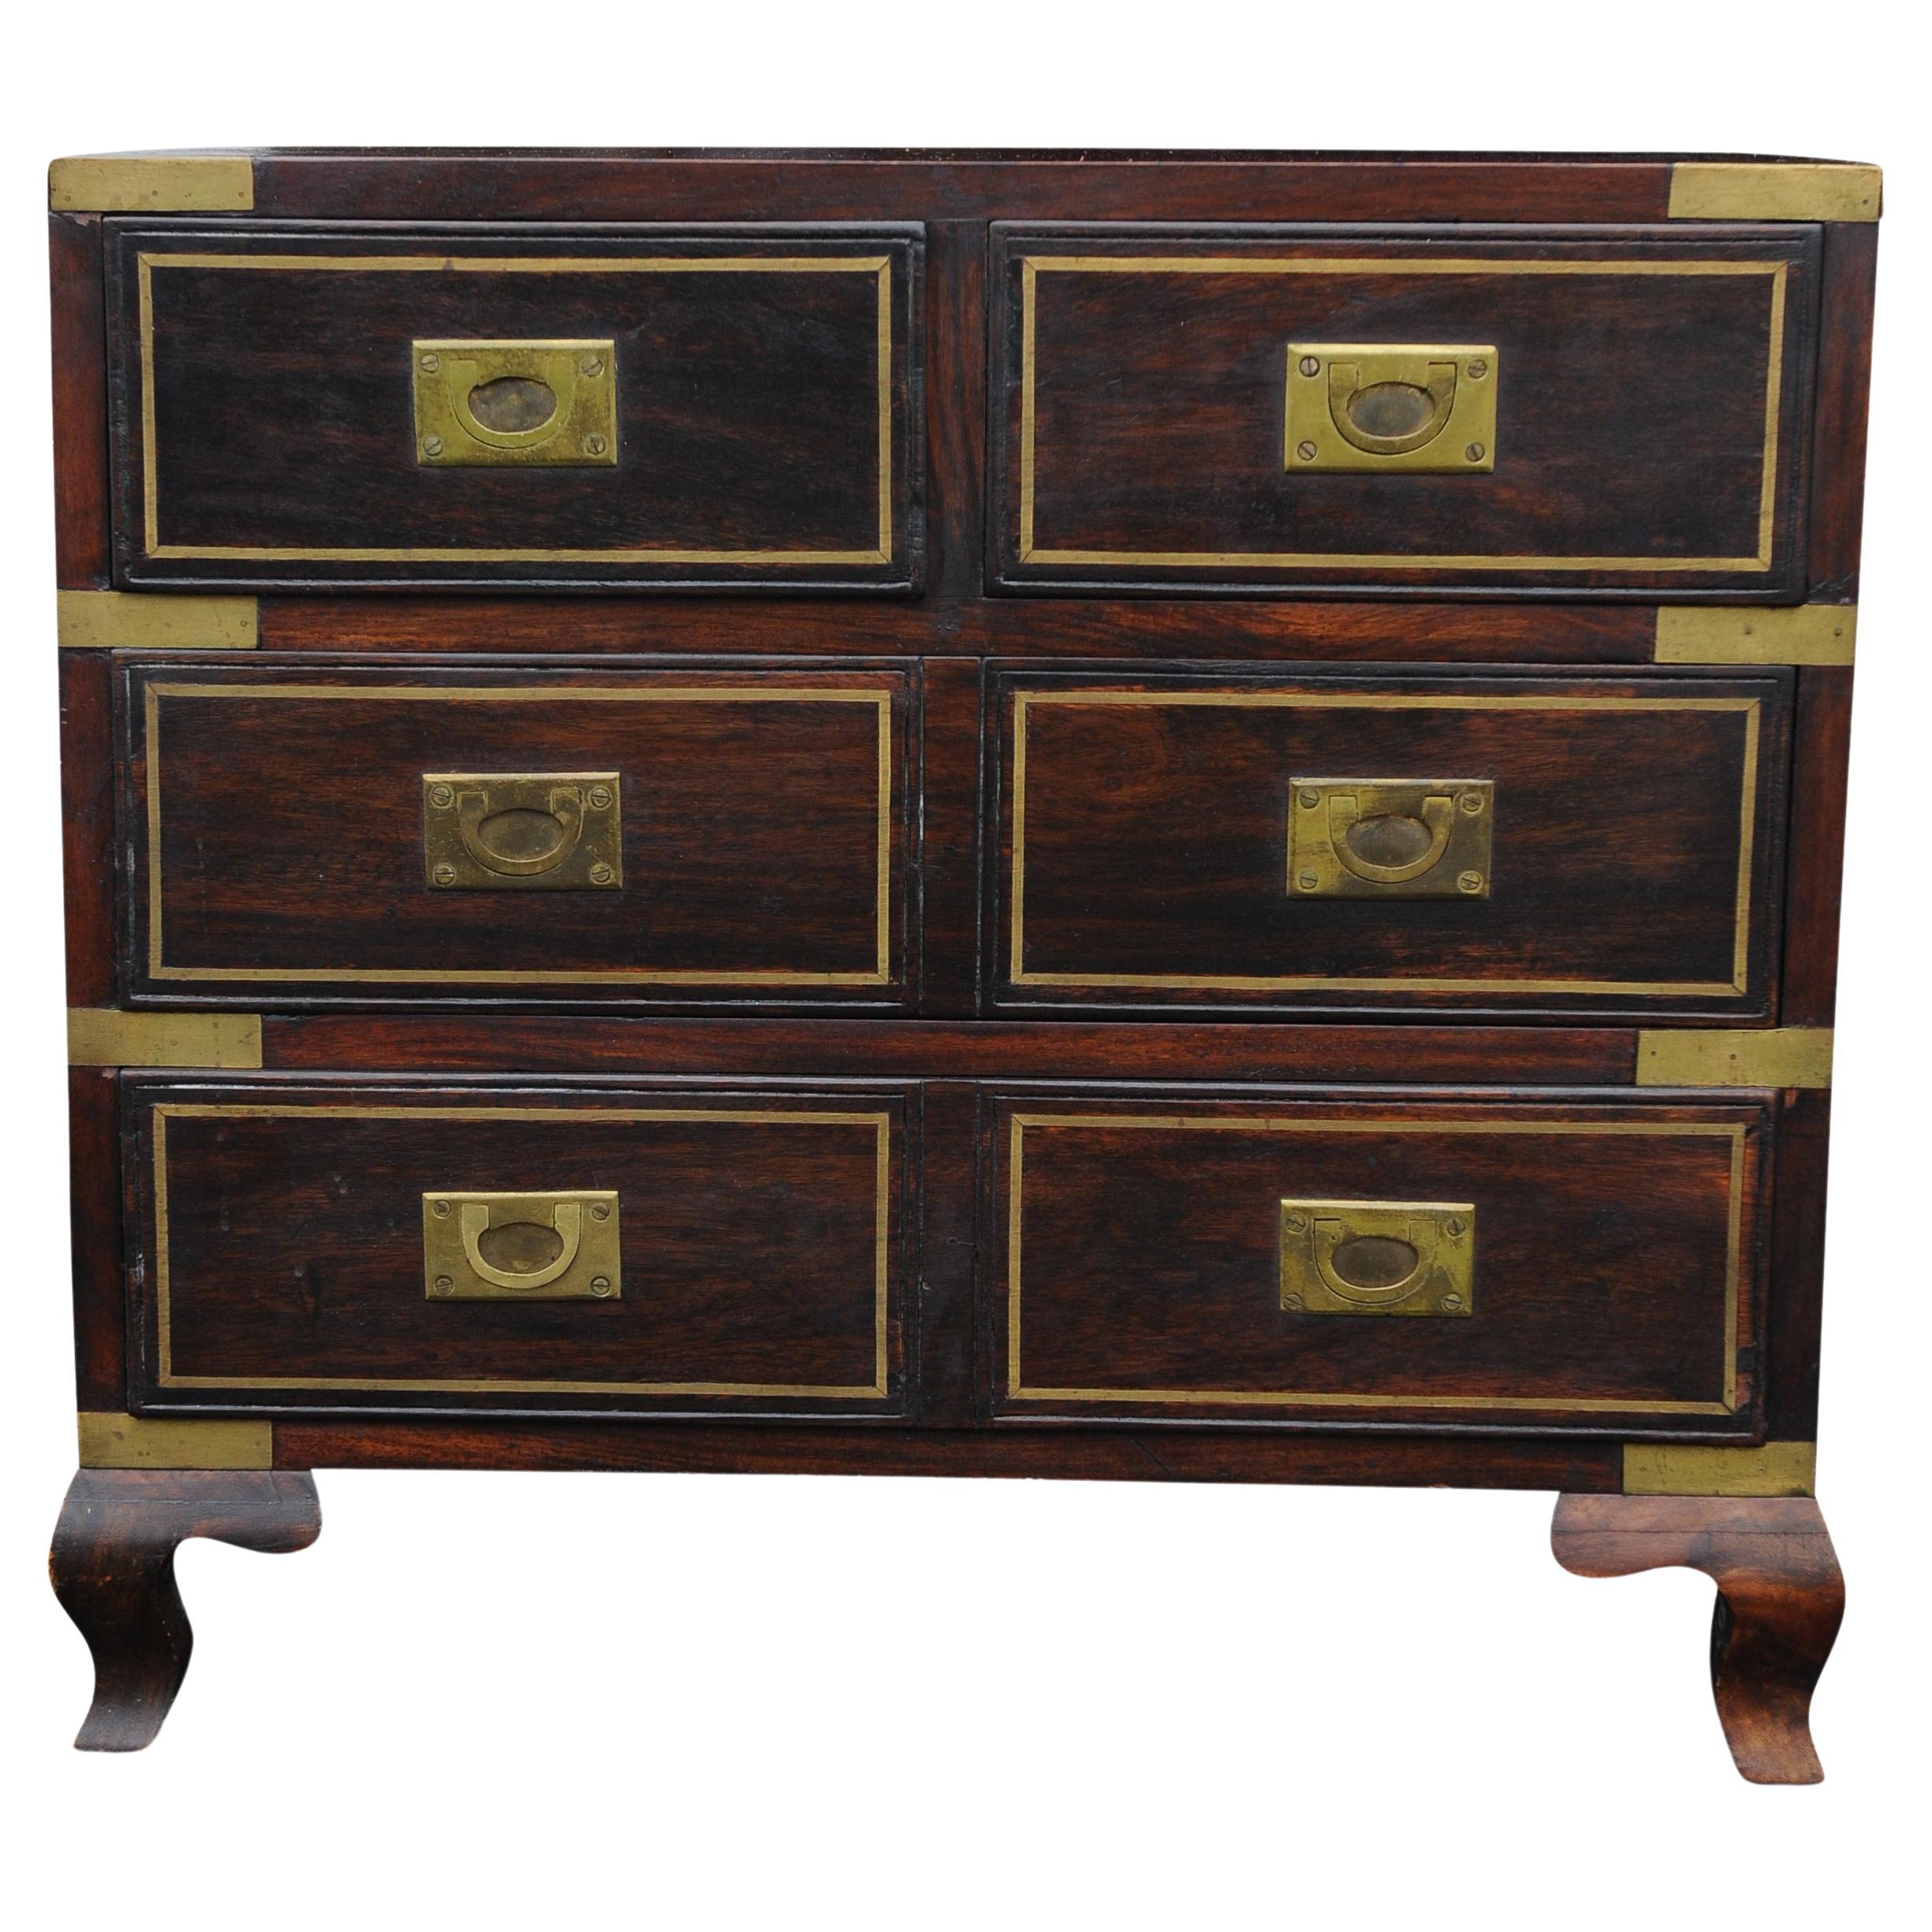 Hardwood Campaign Brass Bound Chest of Two Short and Two Long Drawers